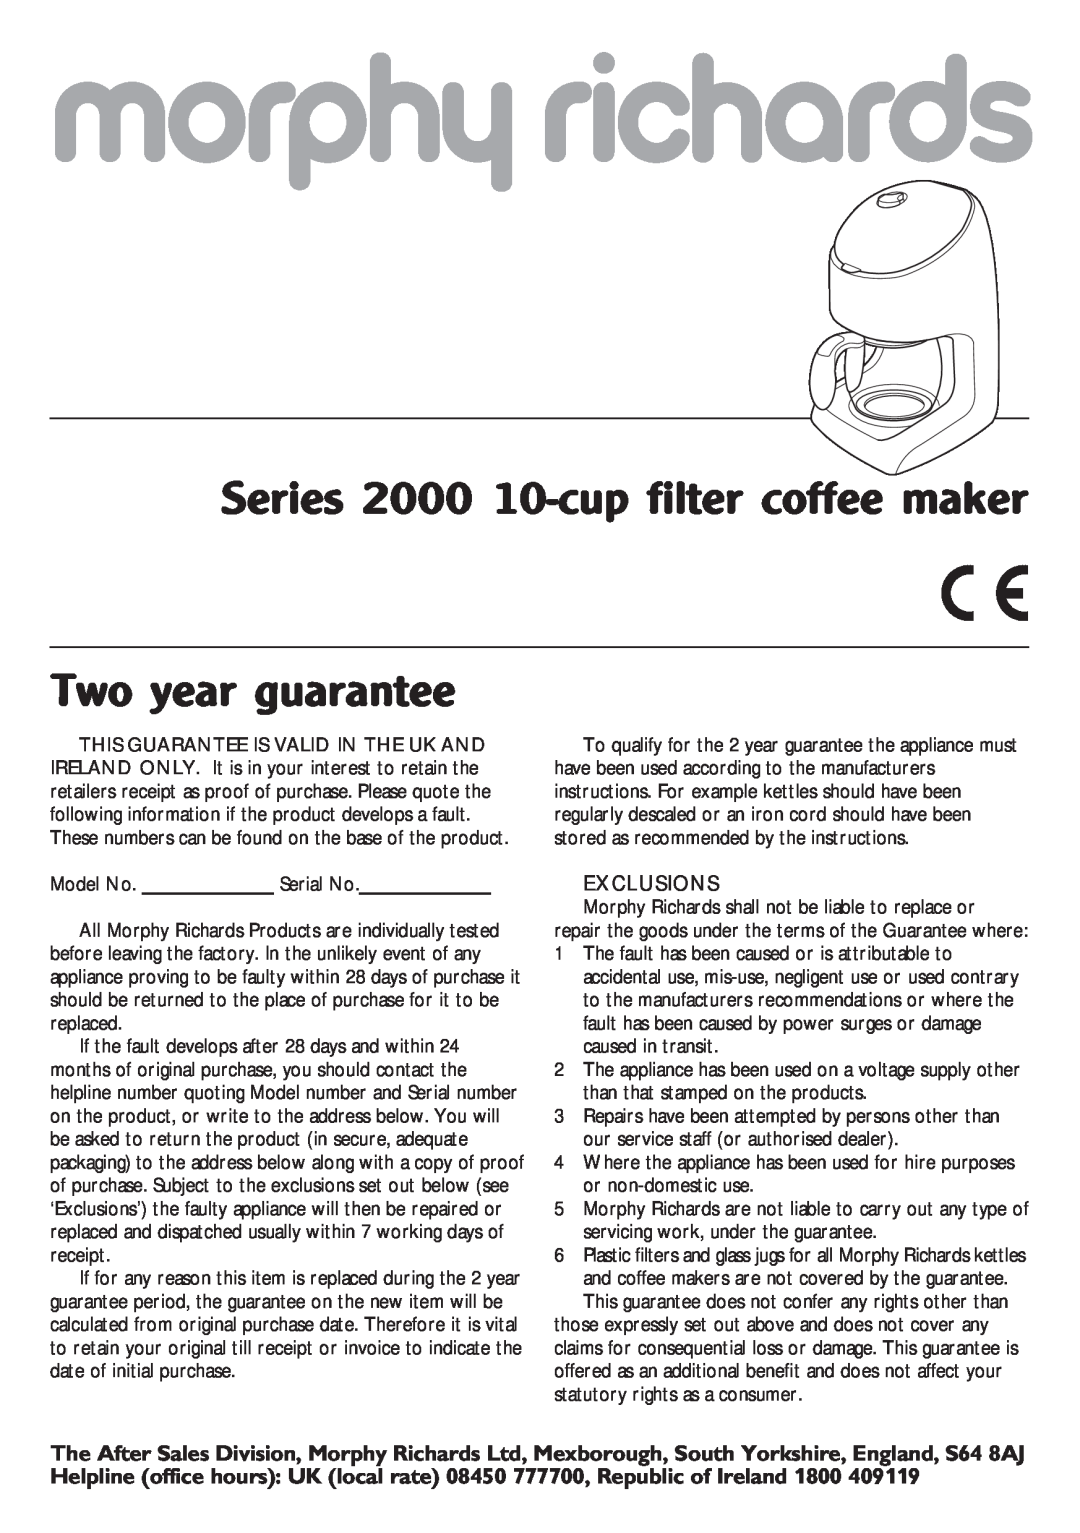 Morphy Richards manual Series 2000 10-cupfilter coffee maker, Two year guarantee, Exclusions 